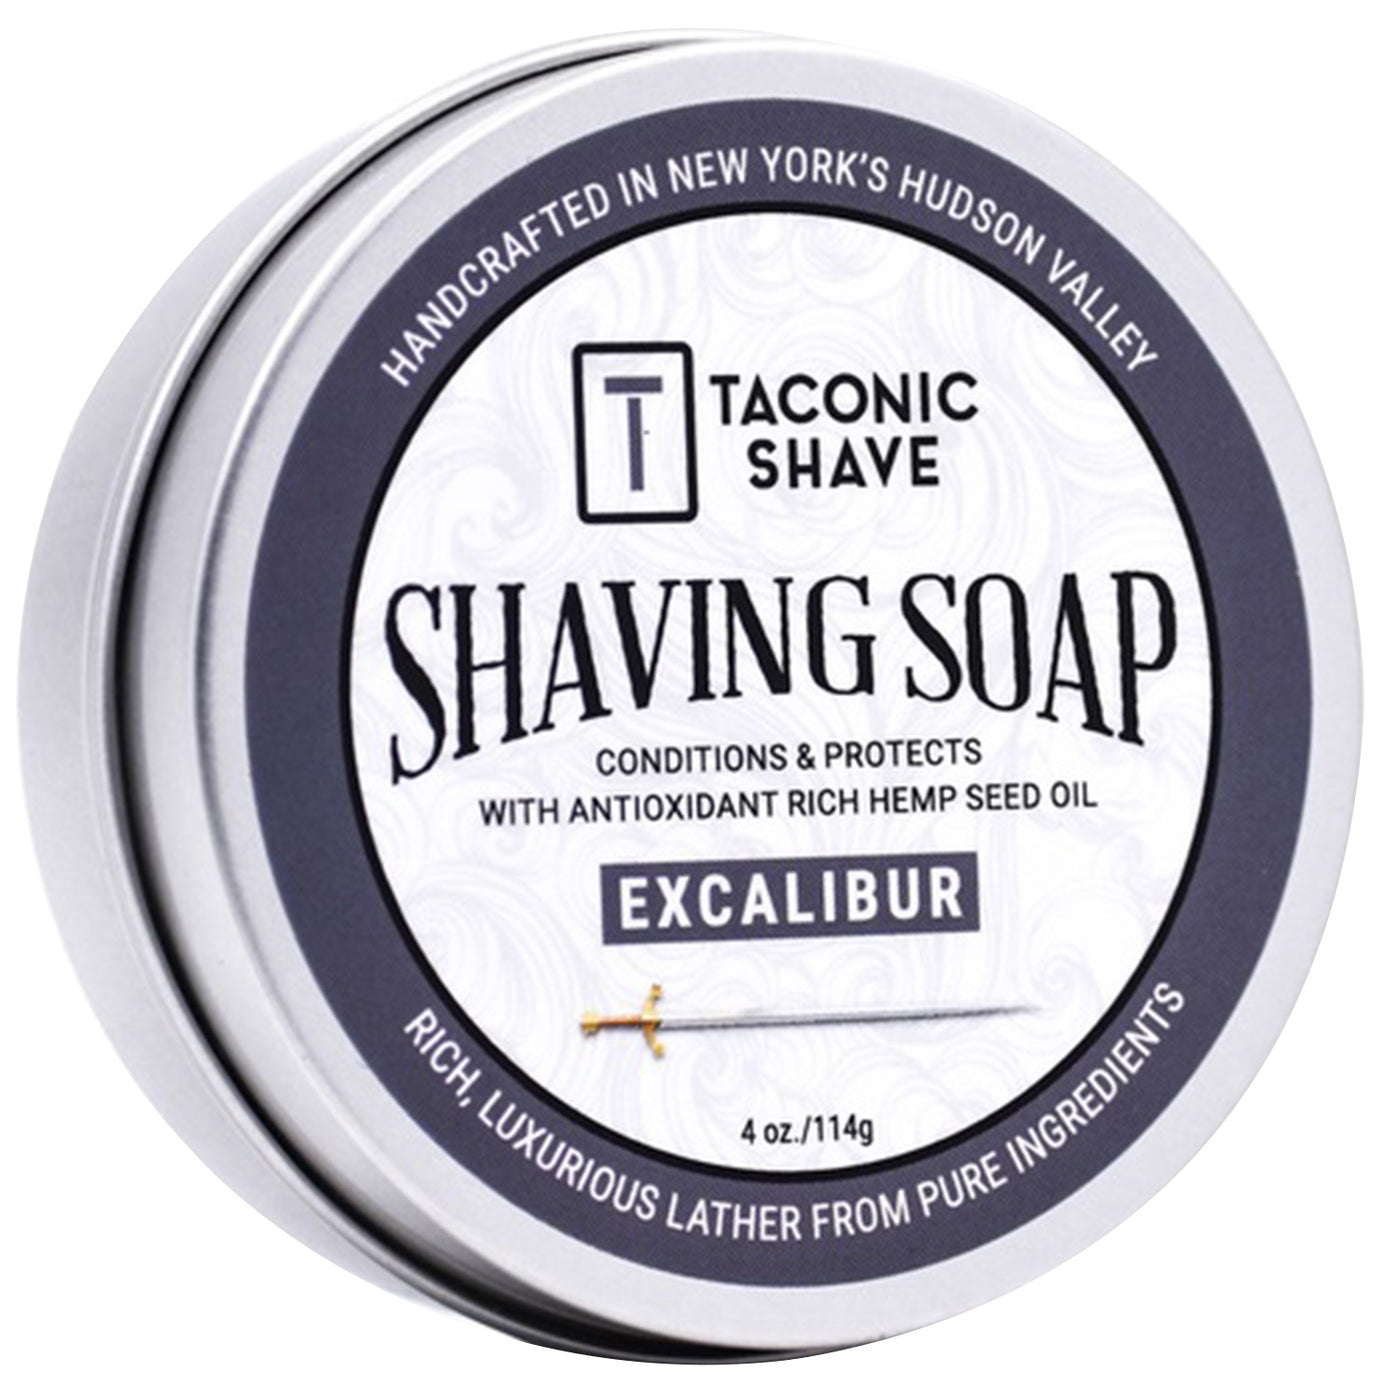  Taconic Shave Hemp & Excalibur Shave Soap by Taconic Shave sold by Naked Armor Razors